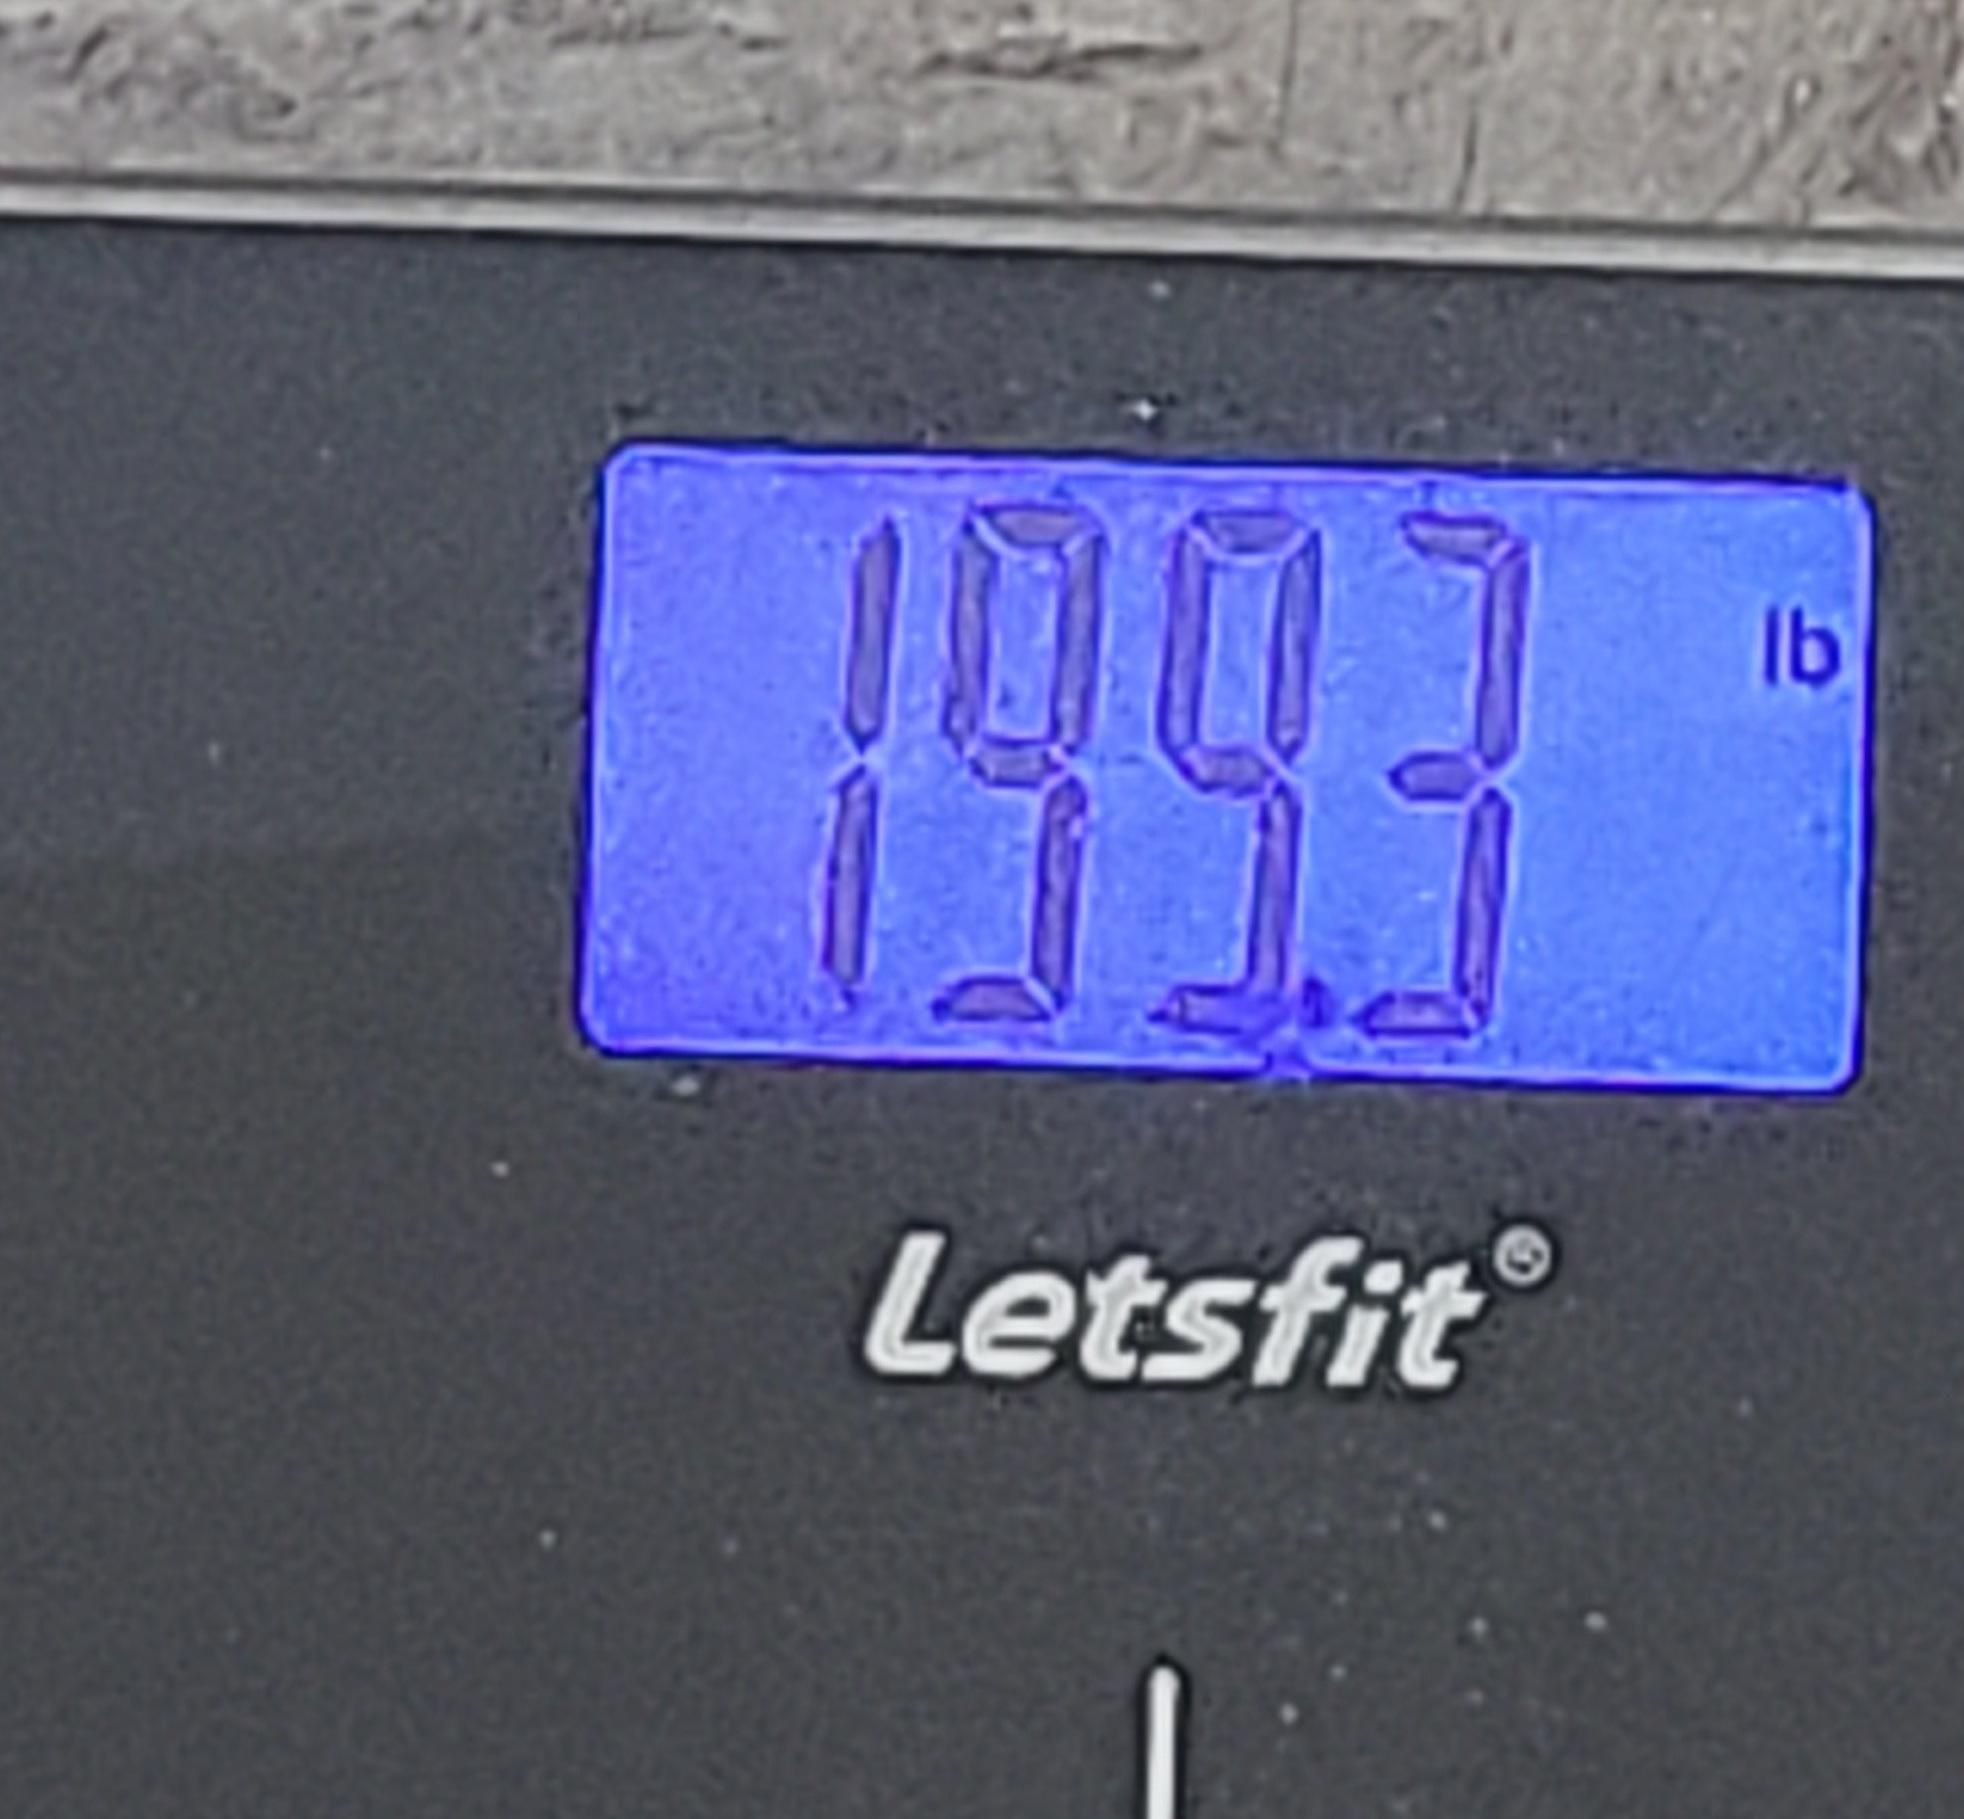 I have nobody to celebrate with but I've lost 200lbs This is the first time I've been under 200lbs in about 15 years!!